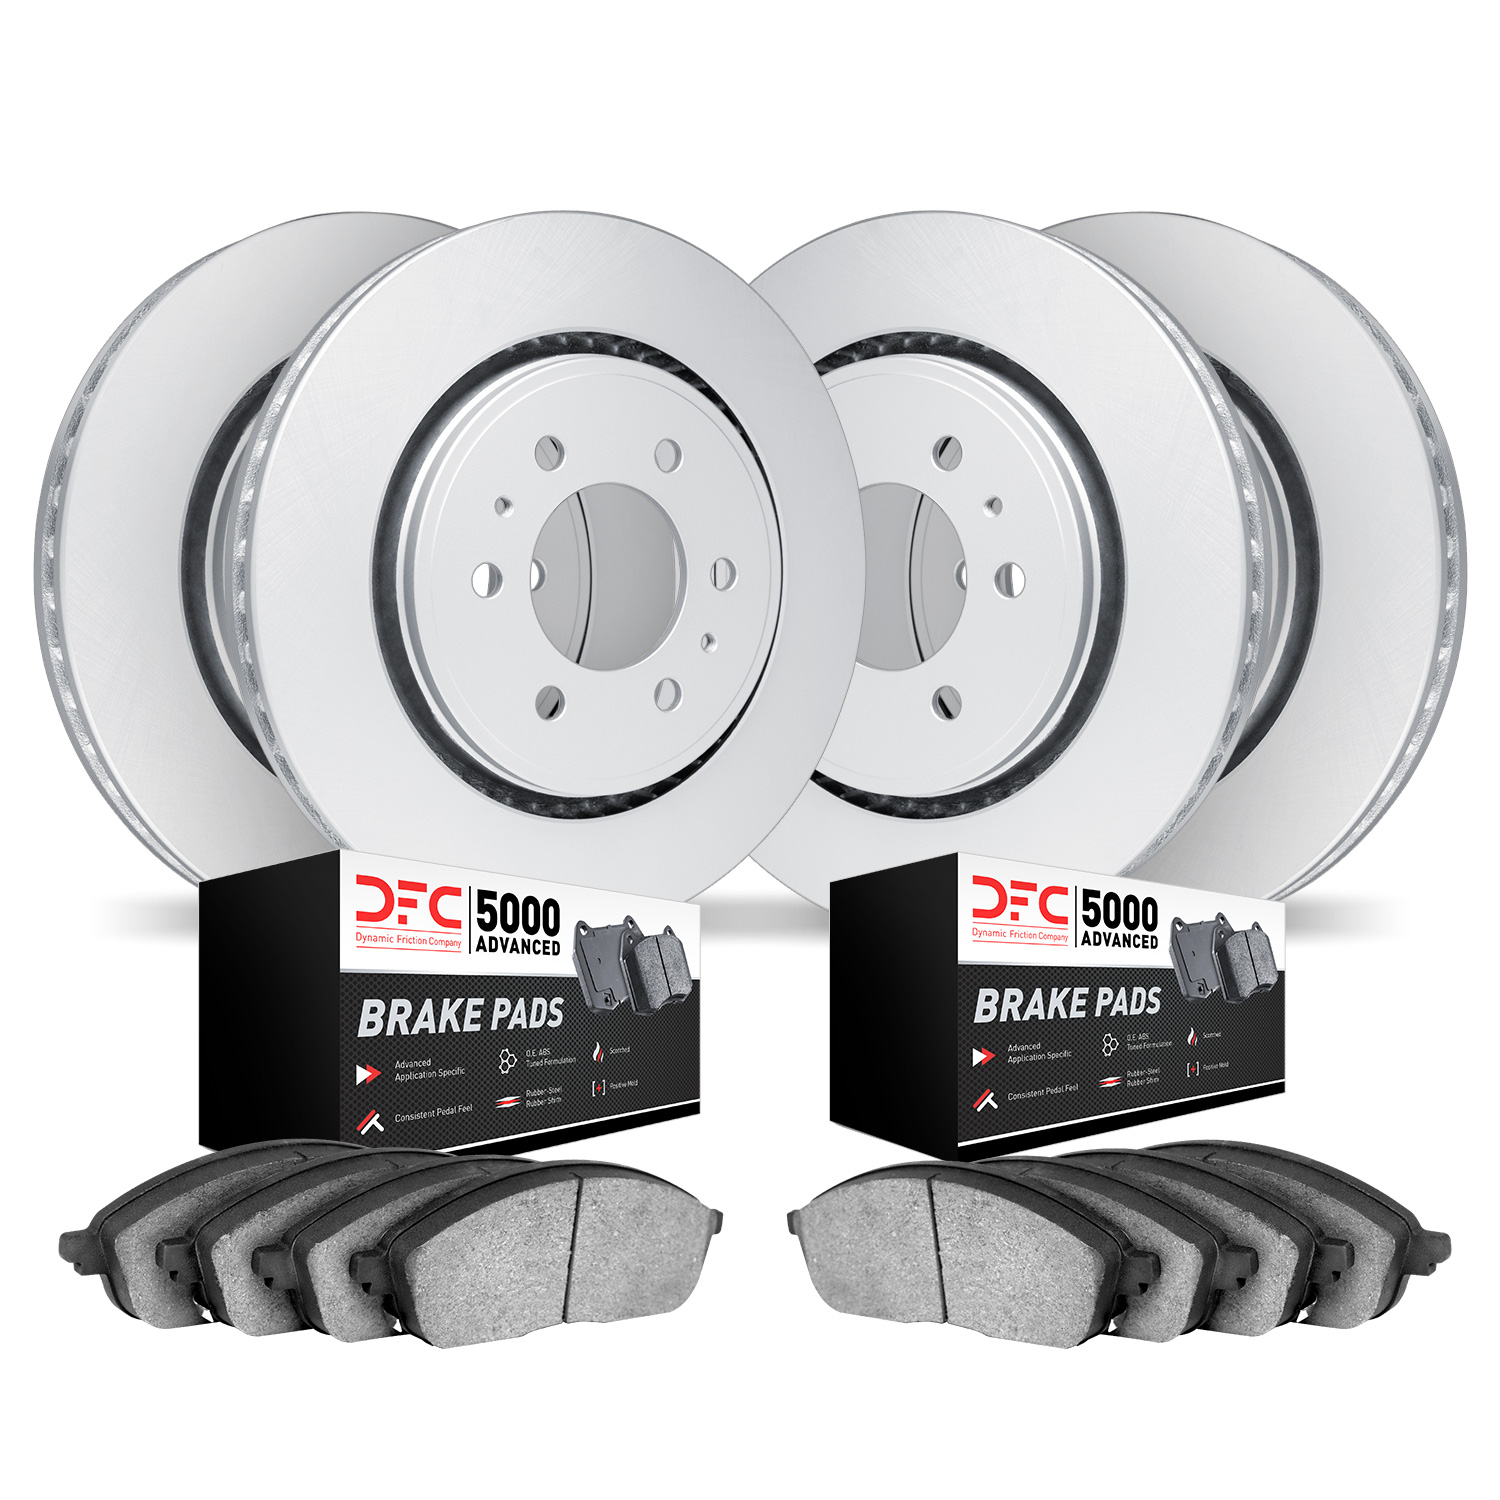 4504-54099 Geospec Brake Rotors w/5000 Advanced Brake Pads Kit, 2010-2017 Ford/Lincoln/Mercury/Mazda, Position: Front and Rear